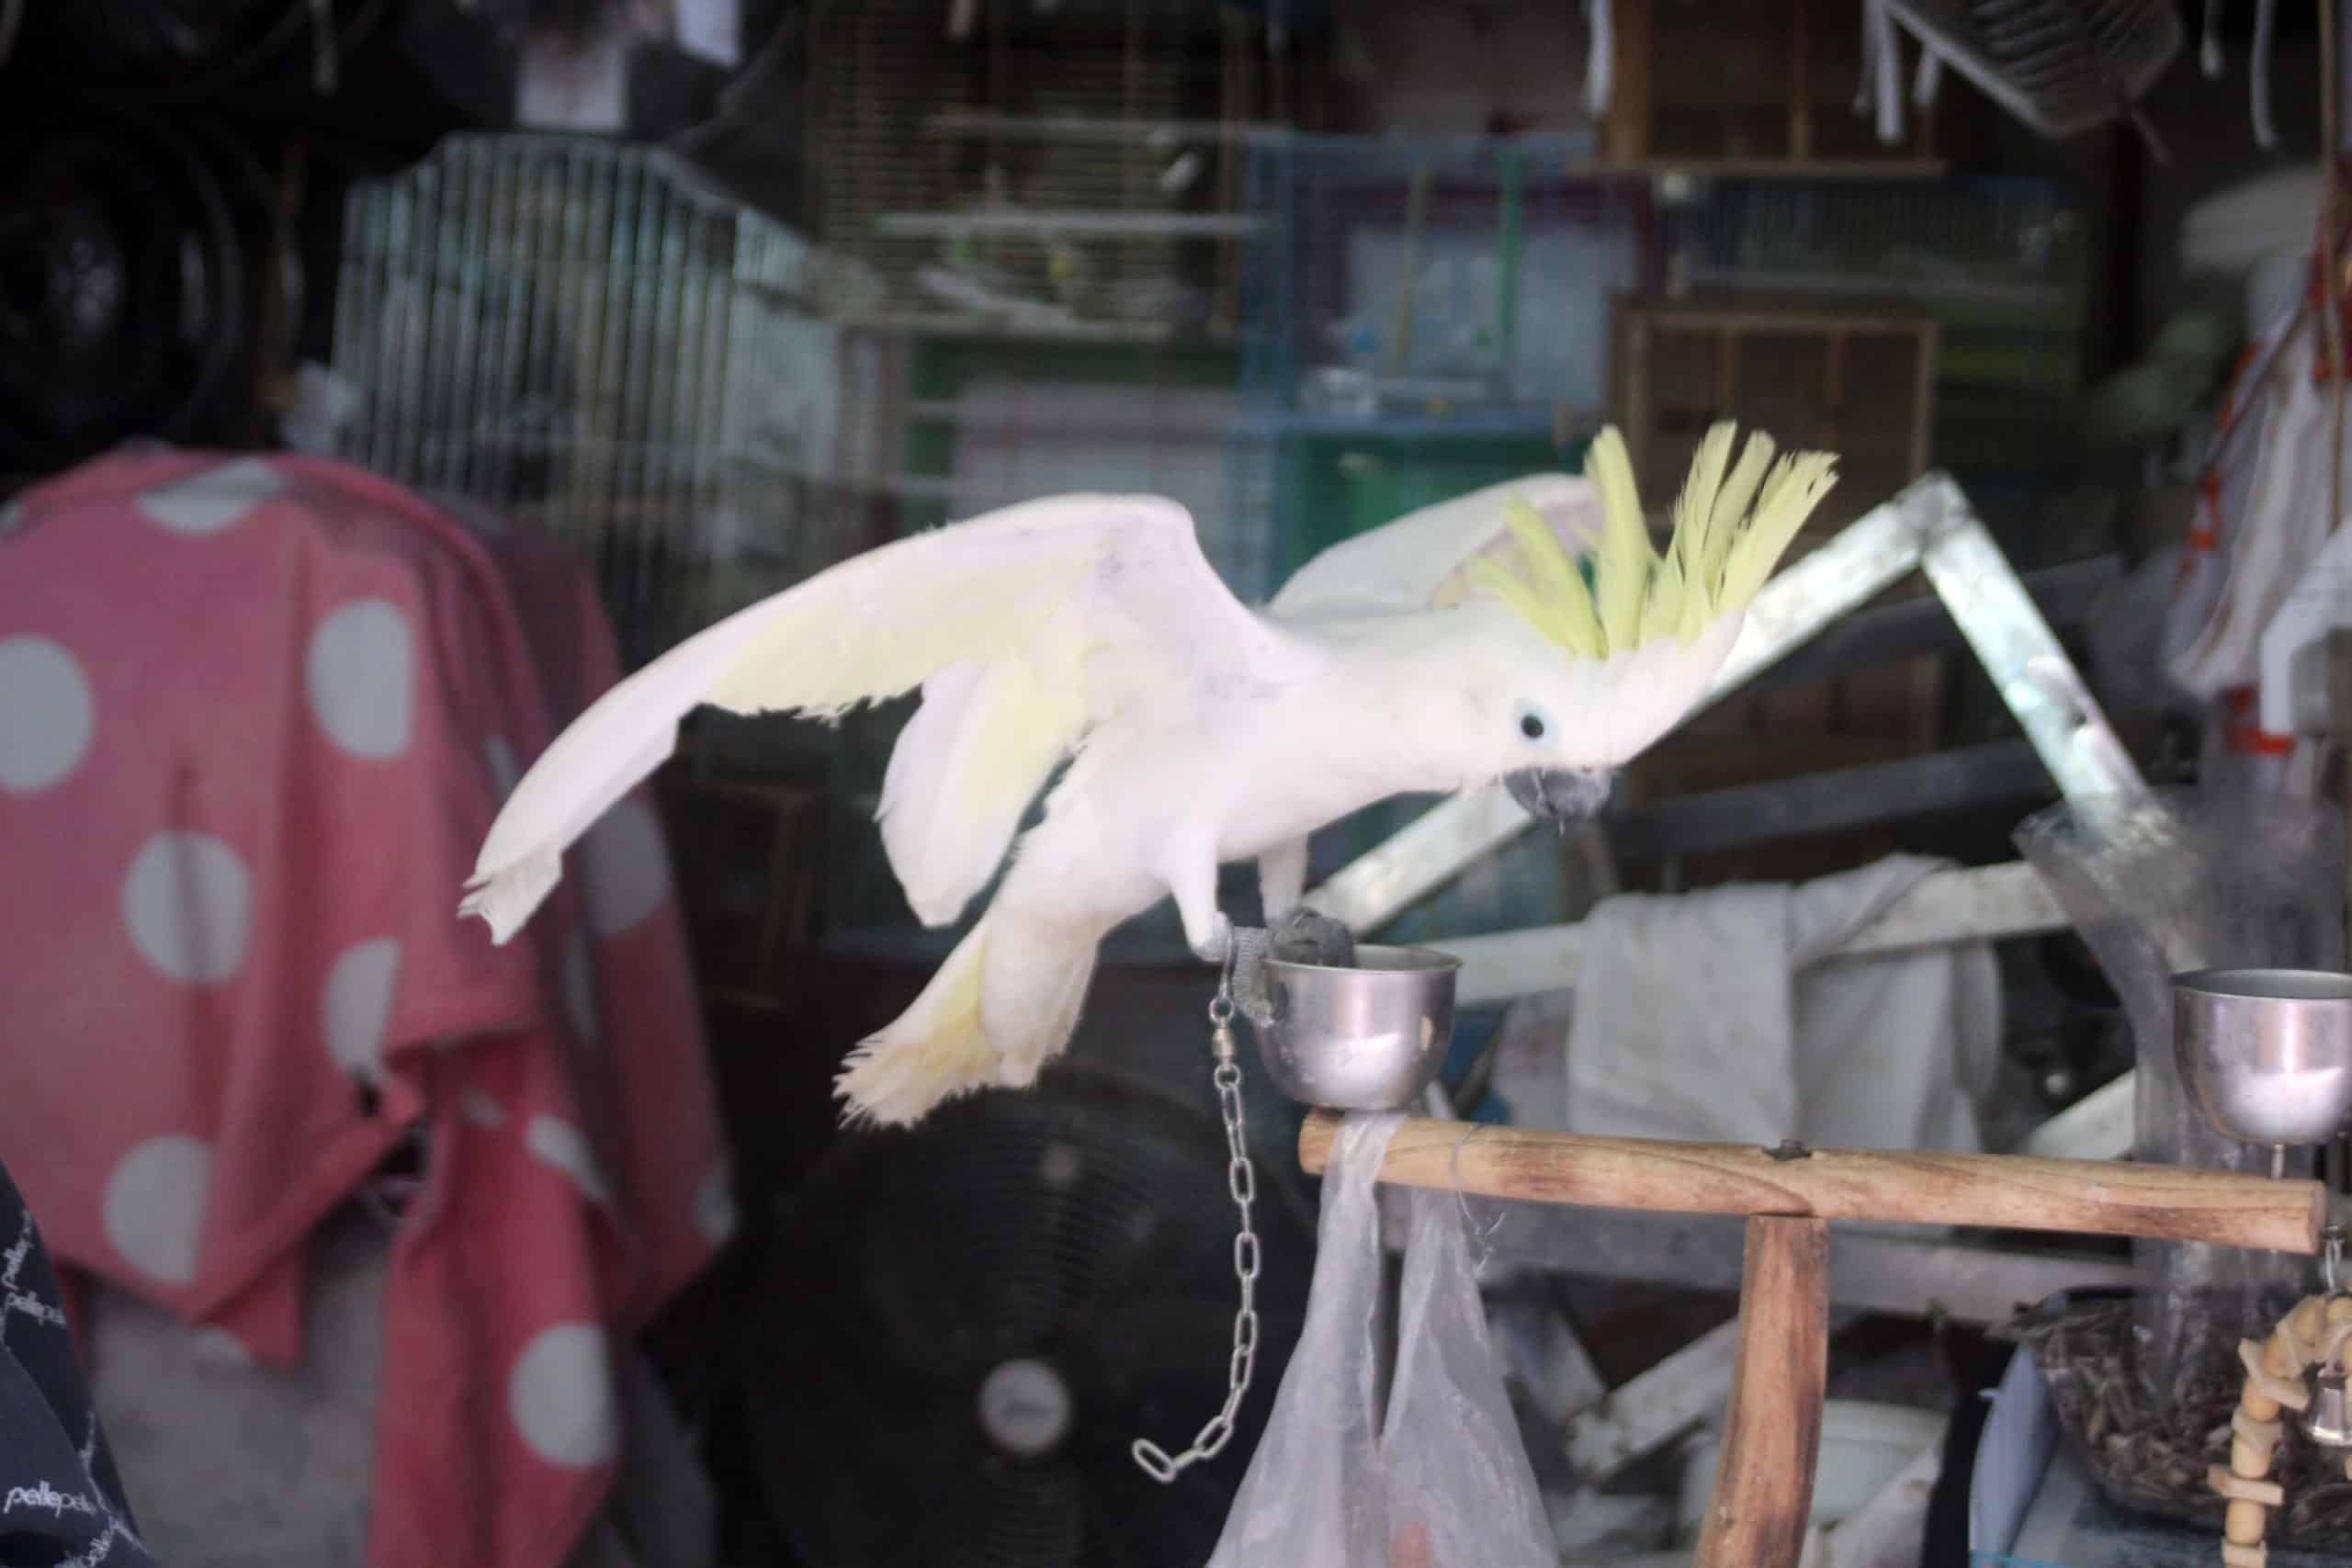 To spot wild-caught birds in pet trade, researchers zoom into isotopic detail